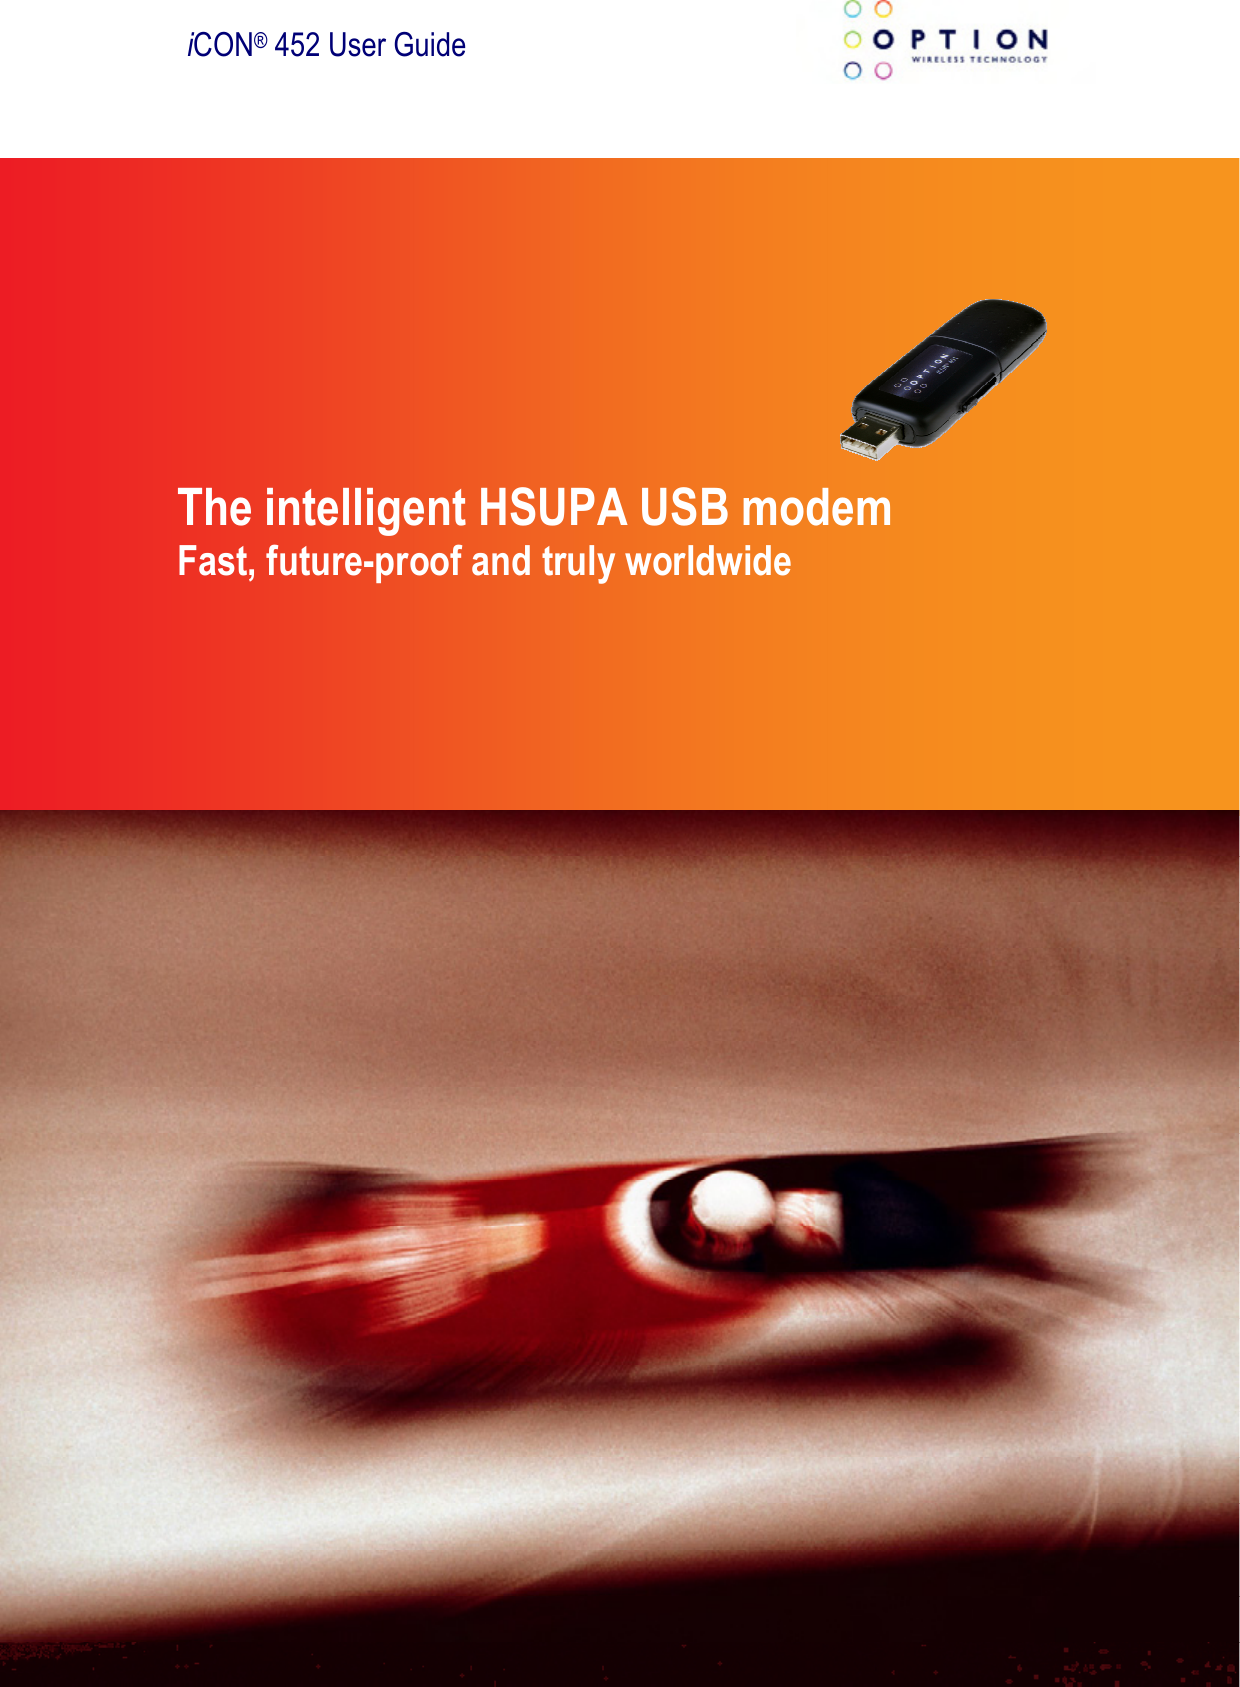  iCON® 452 User Guide The intelligent HSUPA USB modem Fast, future-proof and truly worldwide 